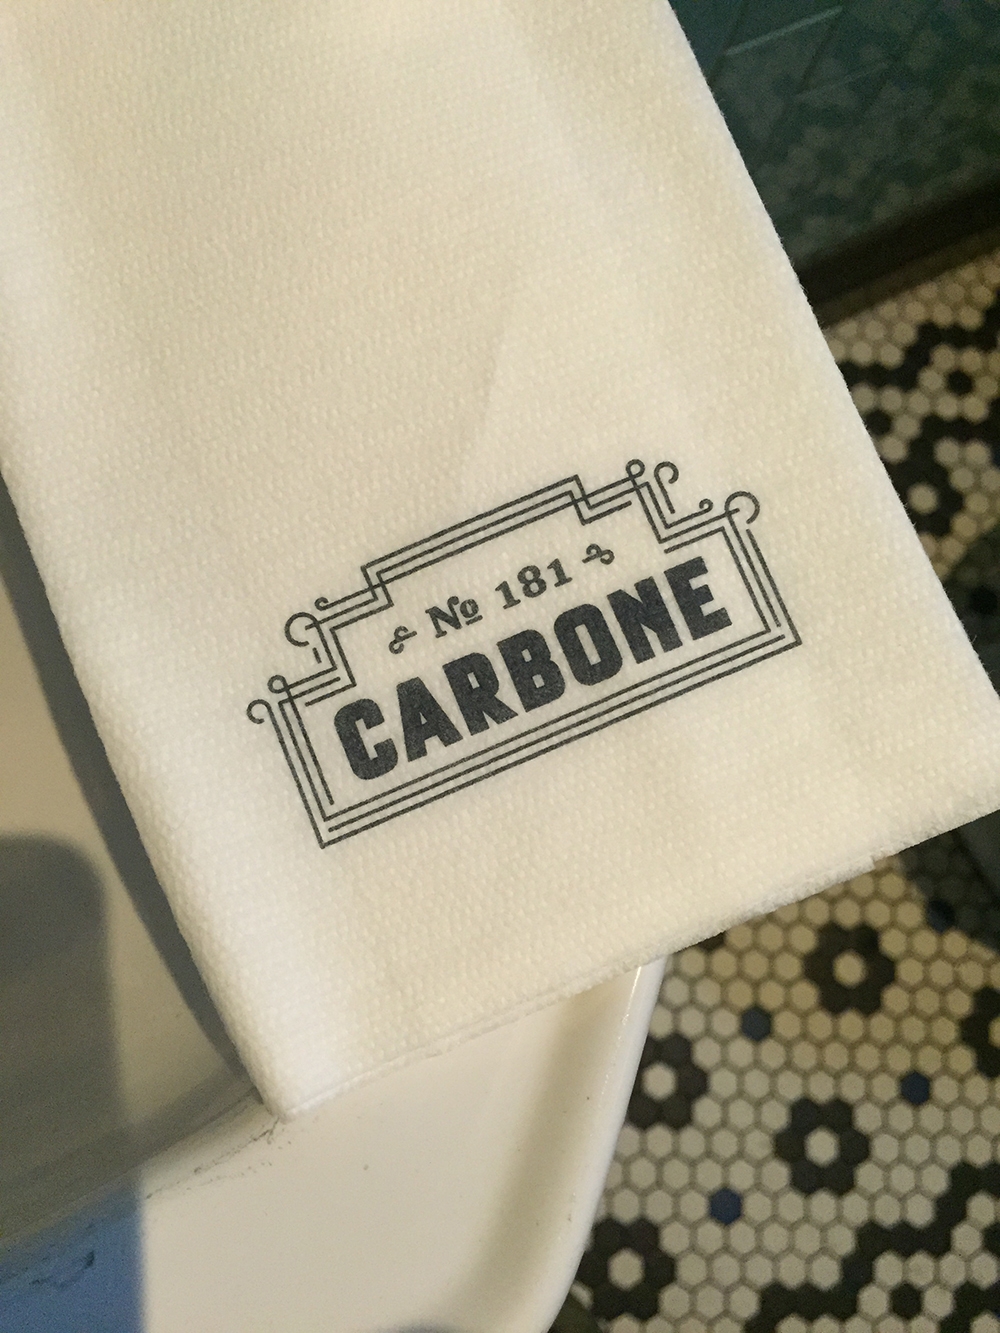 A branded napkin at Carbone, Greenwich Village 